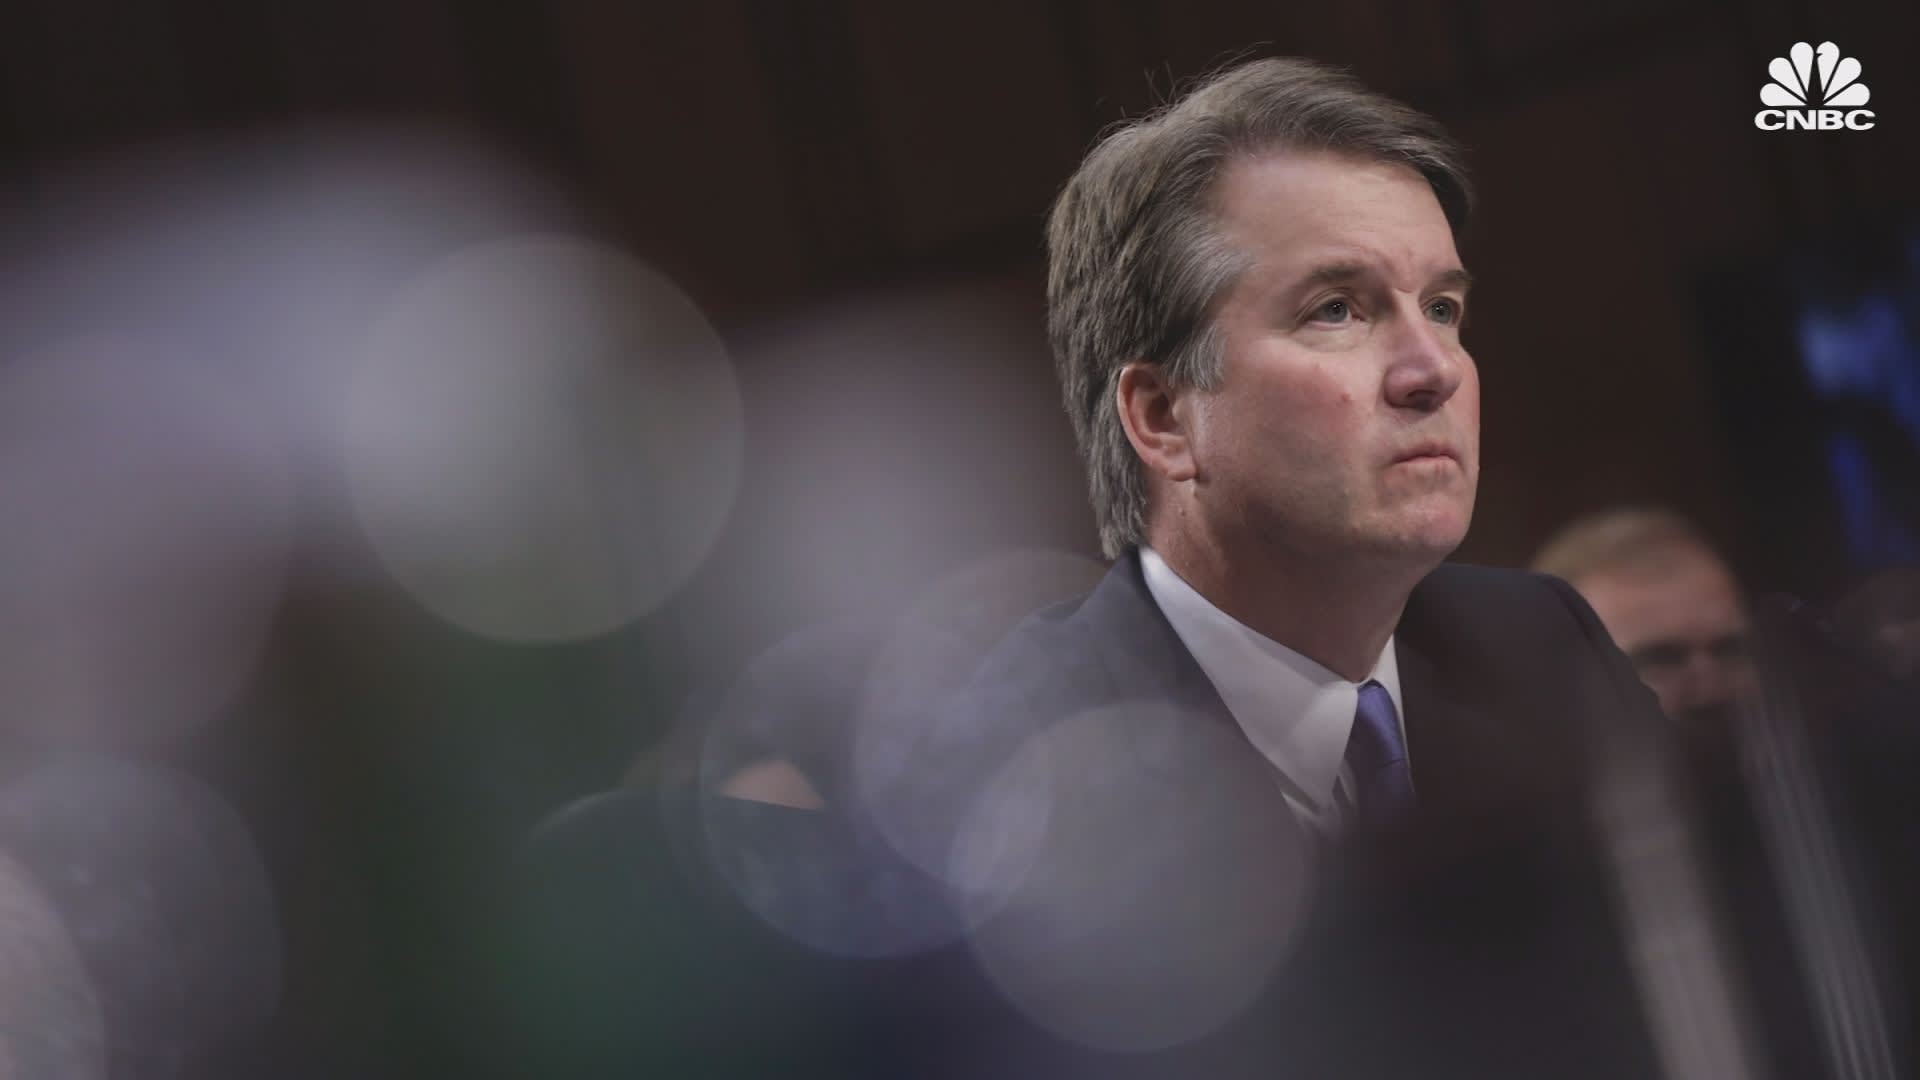 Three Boys Raped A Girl - Kavanaugh accuser Swetnick details parties where girls allegedly raped